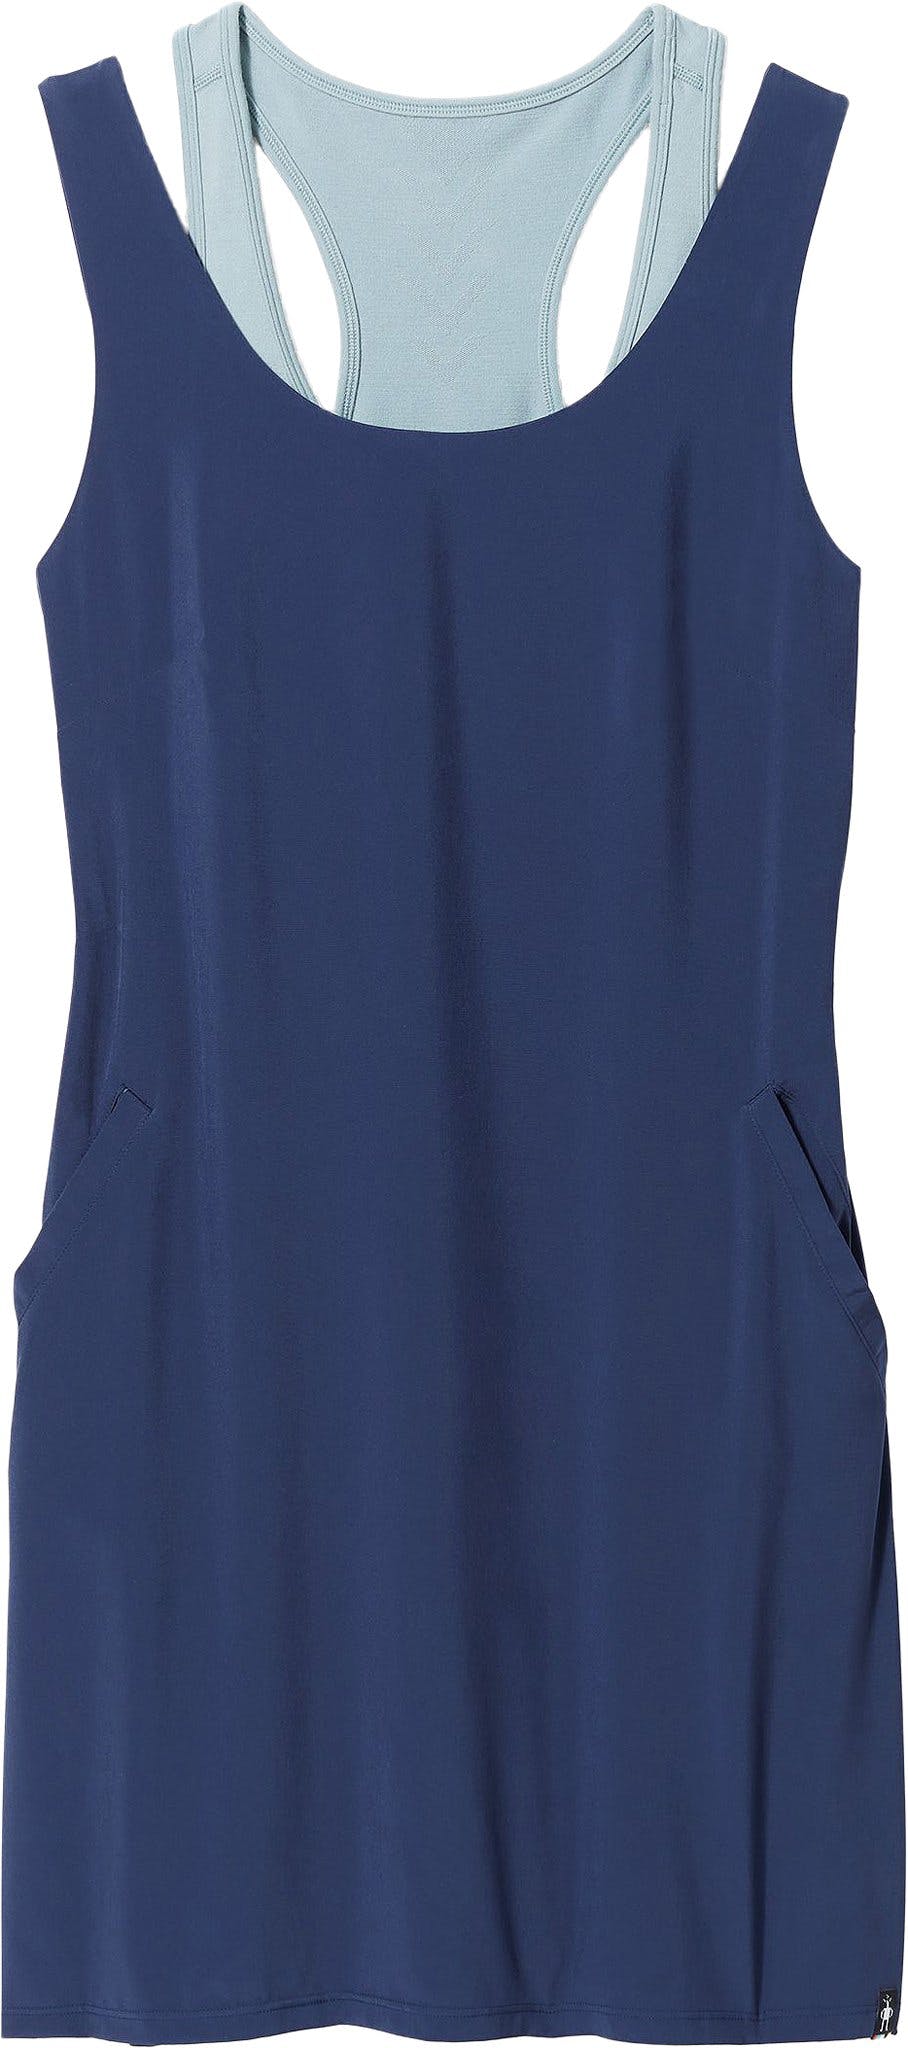 Product image for Intraknit Active Dress - Women's